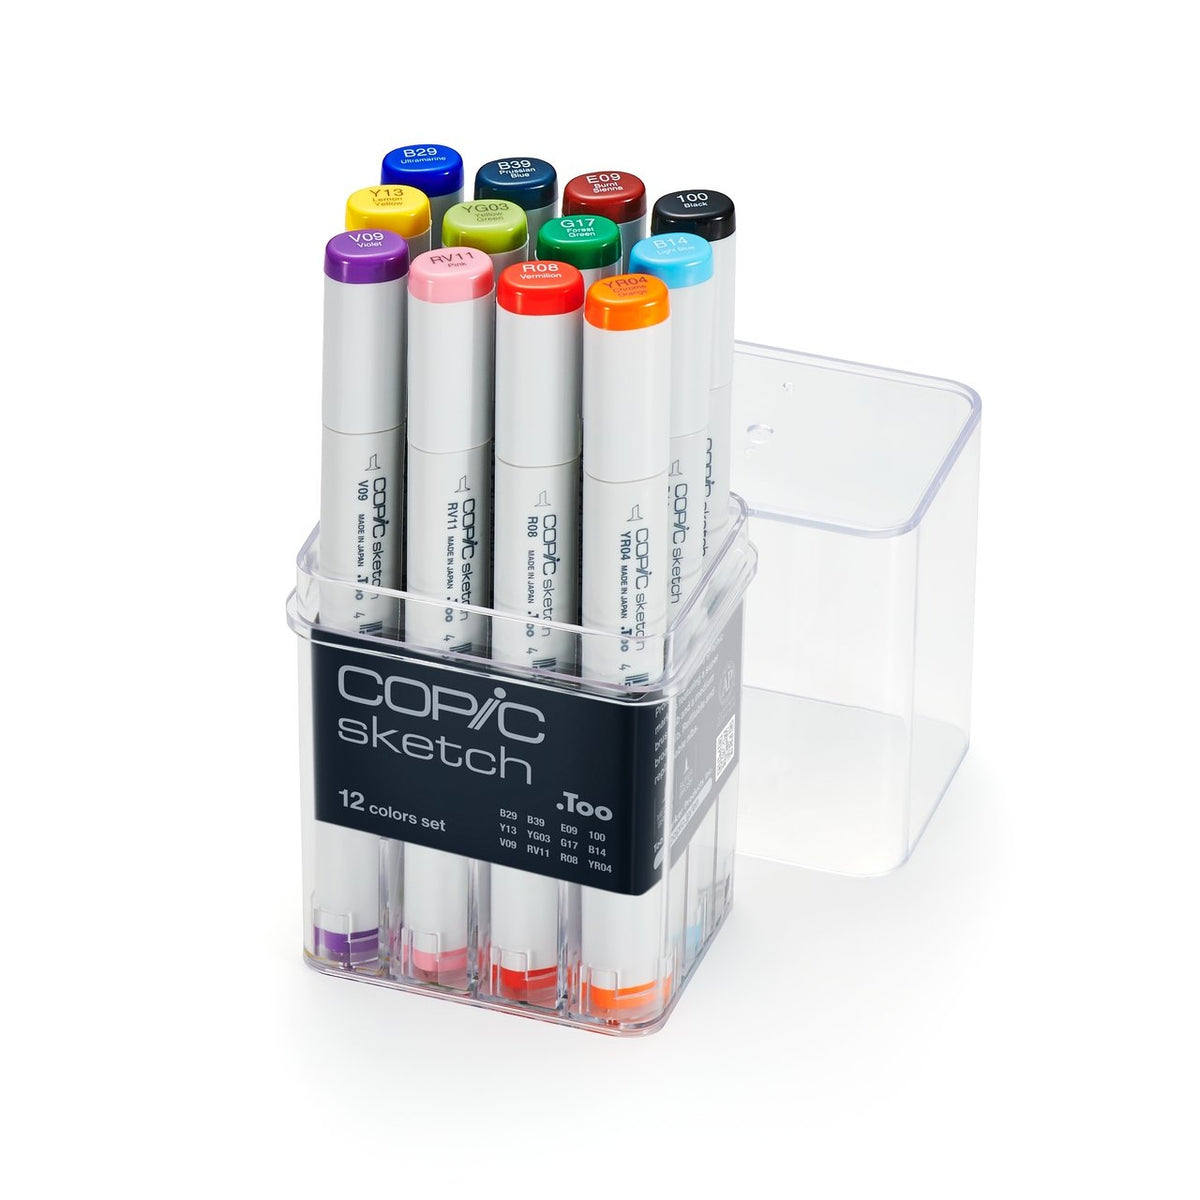 Staedtler Double-Ended Fabric Pen Set of 12